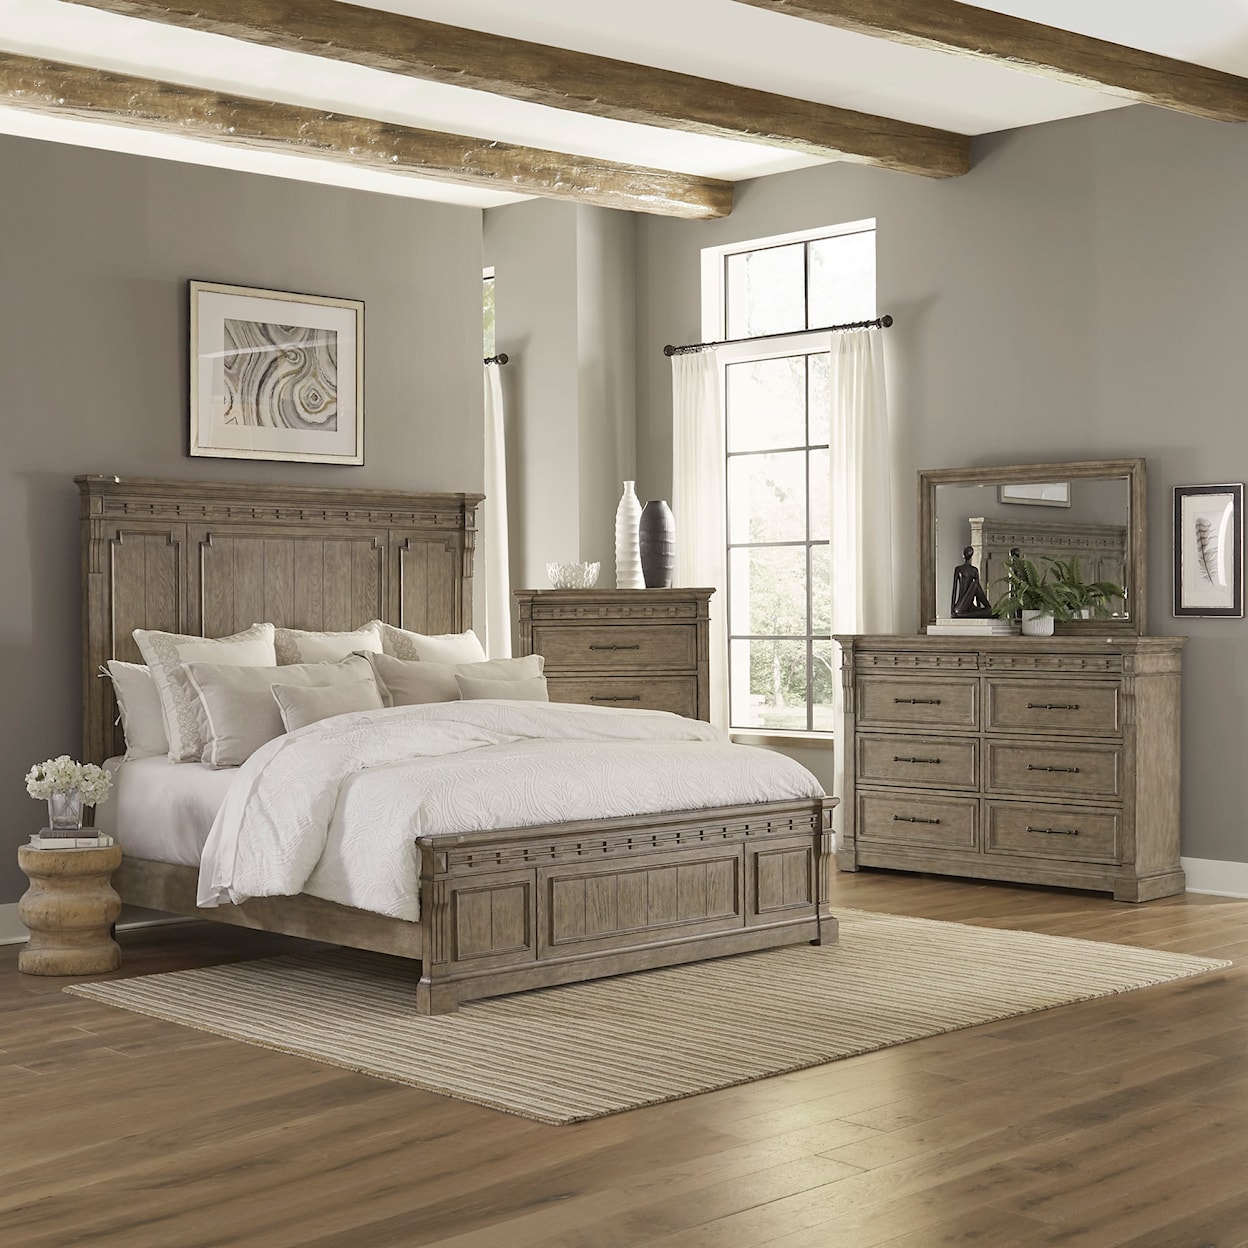 Libby Town & Country 4 Piece Bedroom Set